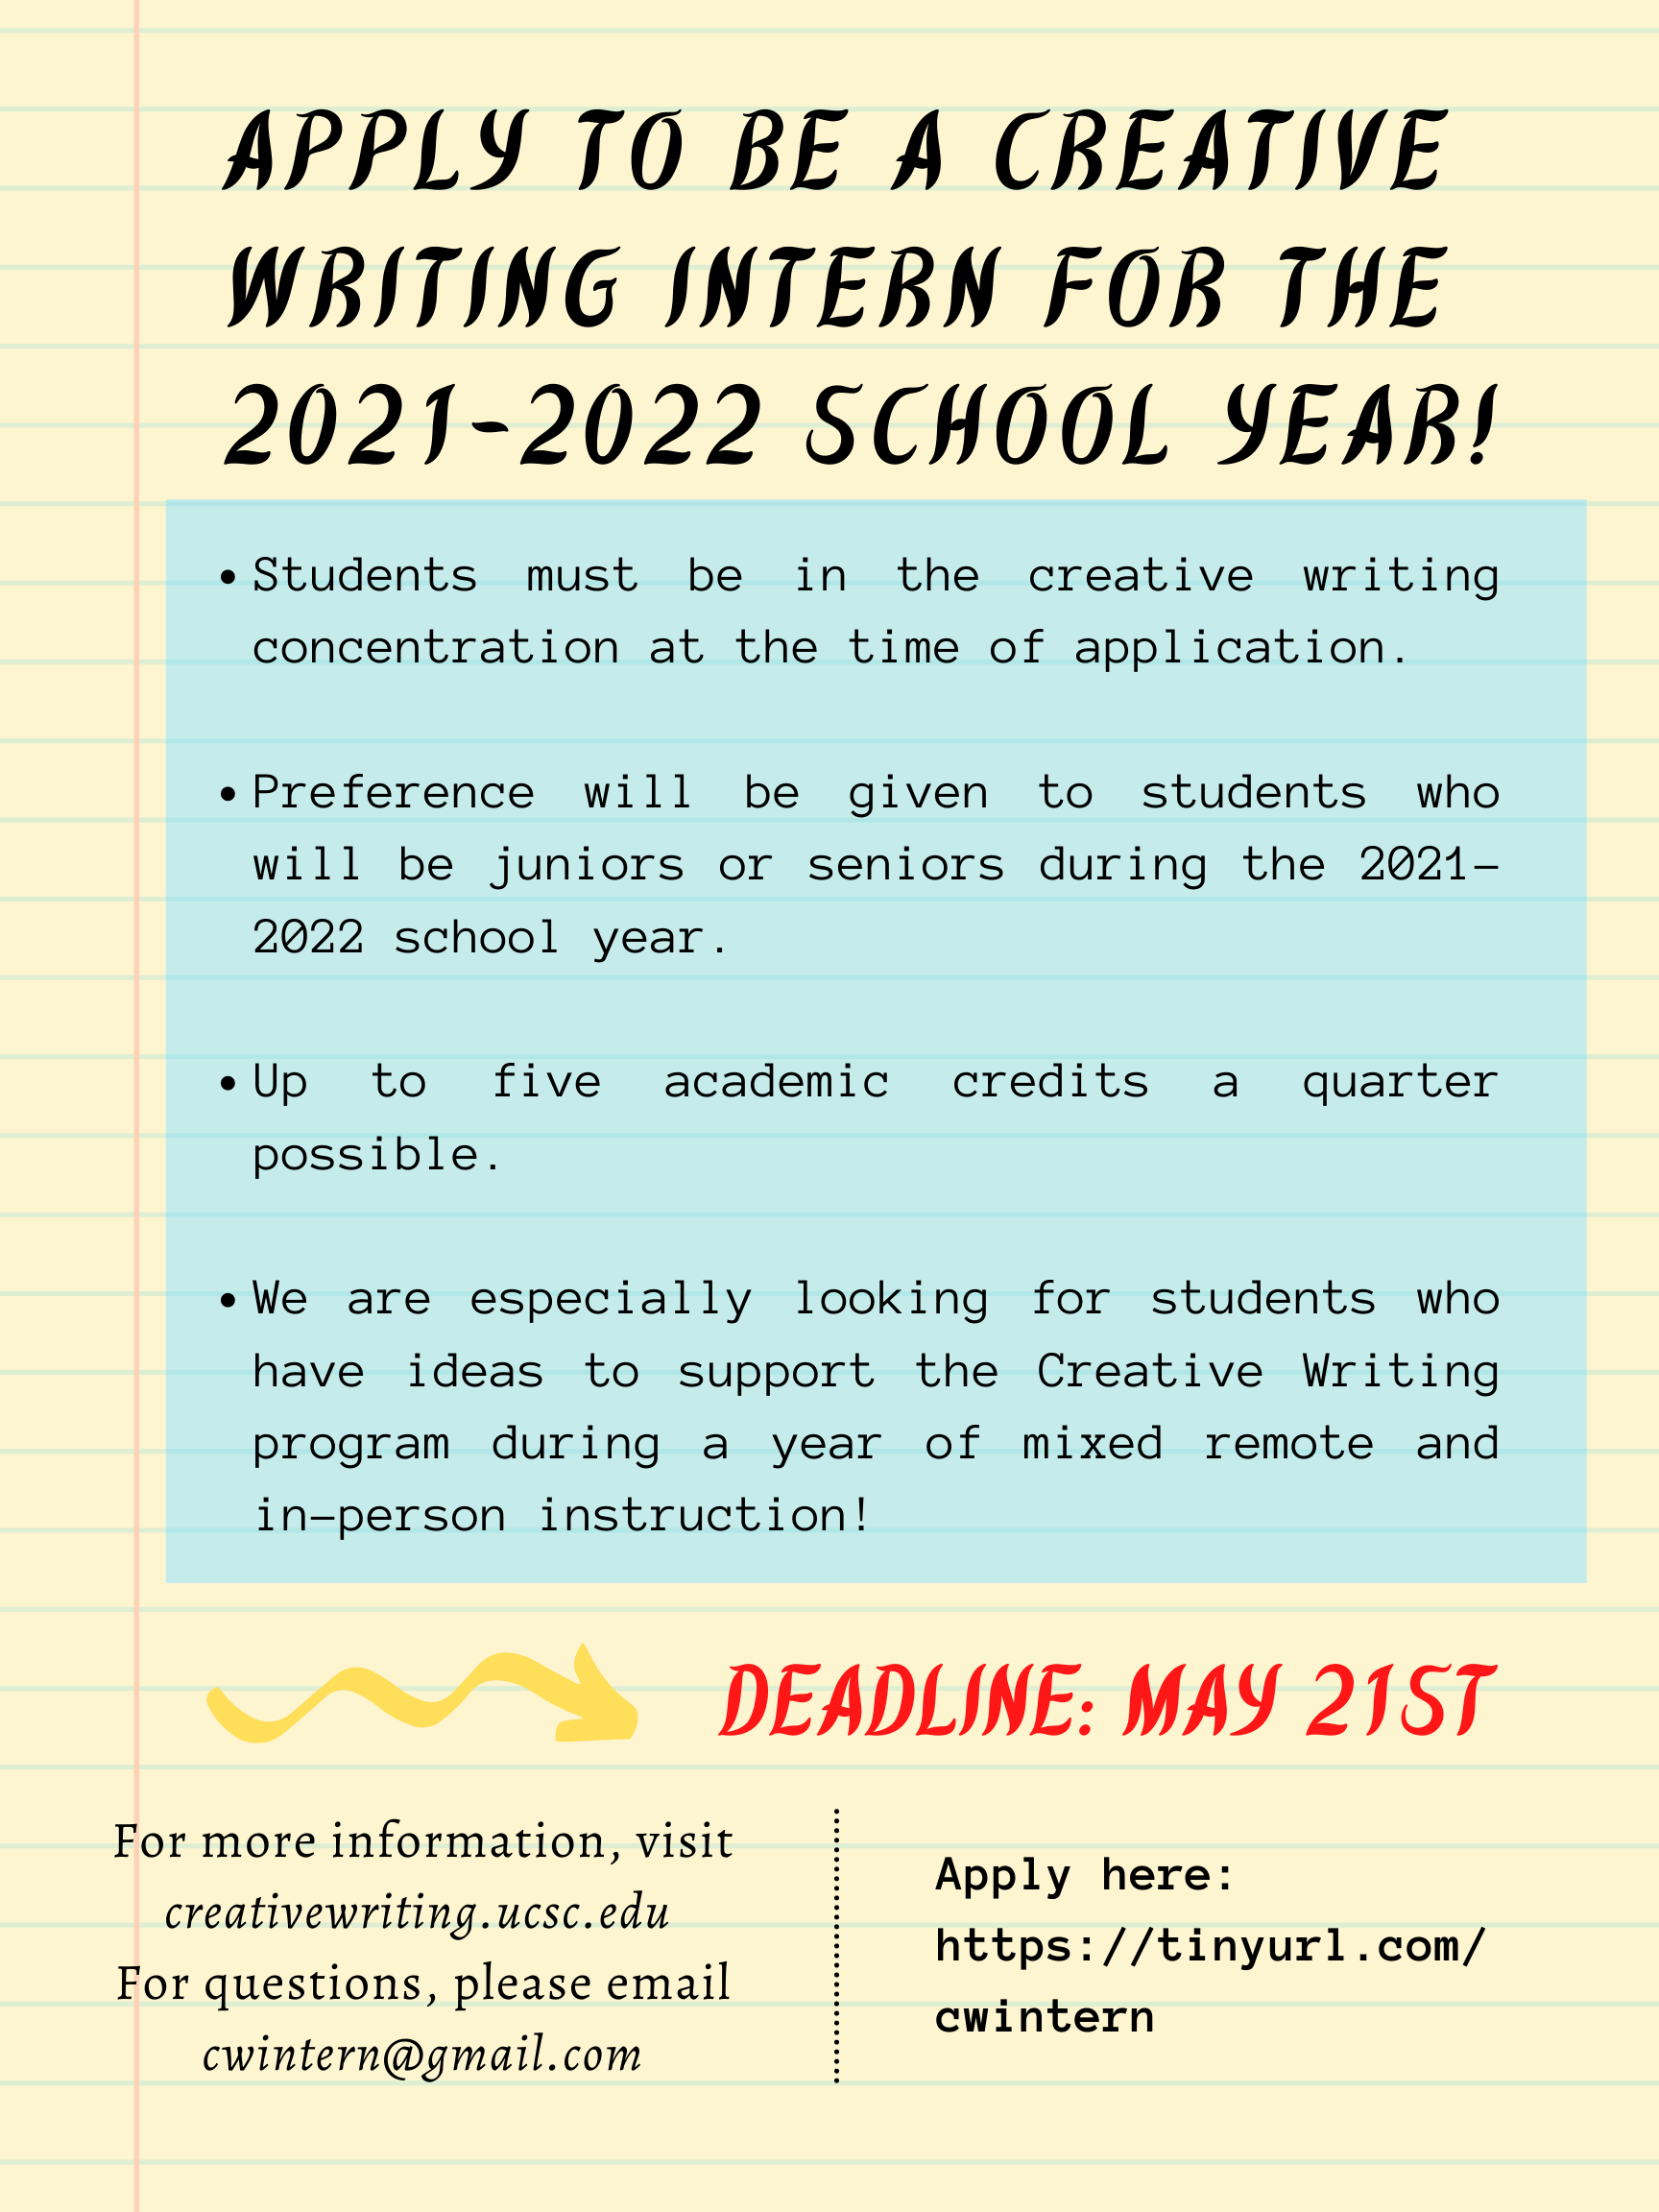 Apply to be a creative writing intern for the 2021-2022 school year! Students must be in the creative writing concentration at the time of application. Preference will be given to students who will be juniors or seniors during the 2021-2022 school year. Up to five academic credits a quarter possible. We are especially looking for students who have ideas to support the creative writing program during a year of mixed remote and in-person instruction! Deadline May 21st.